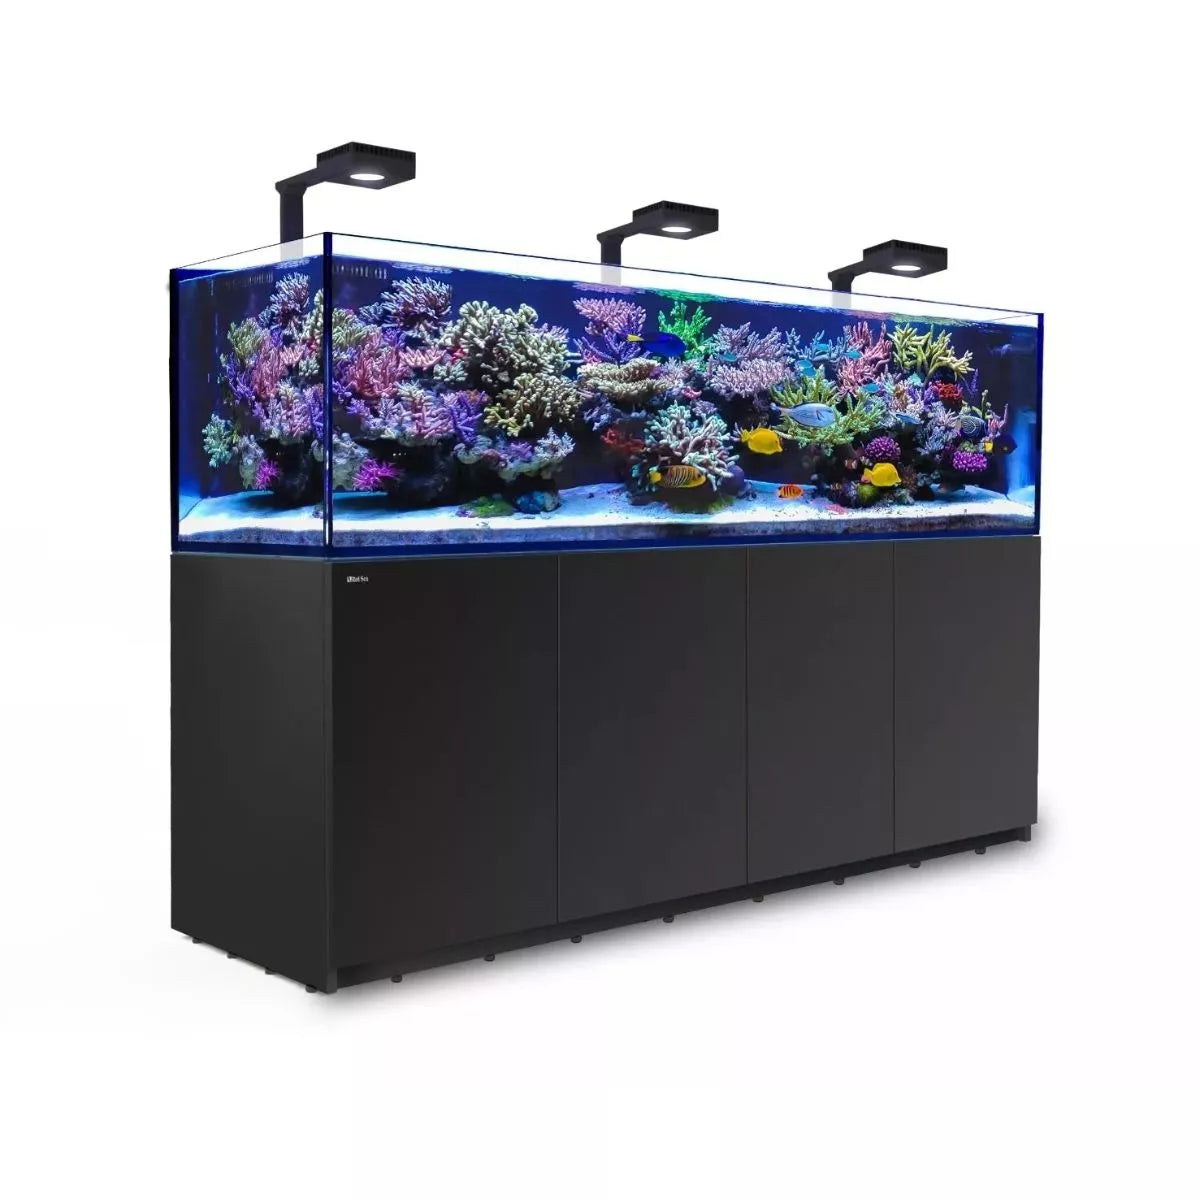 Reefer MAX 900 G2+ System (192 Gal) - Red Sea